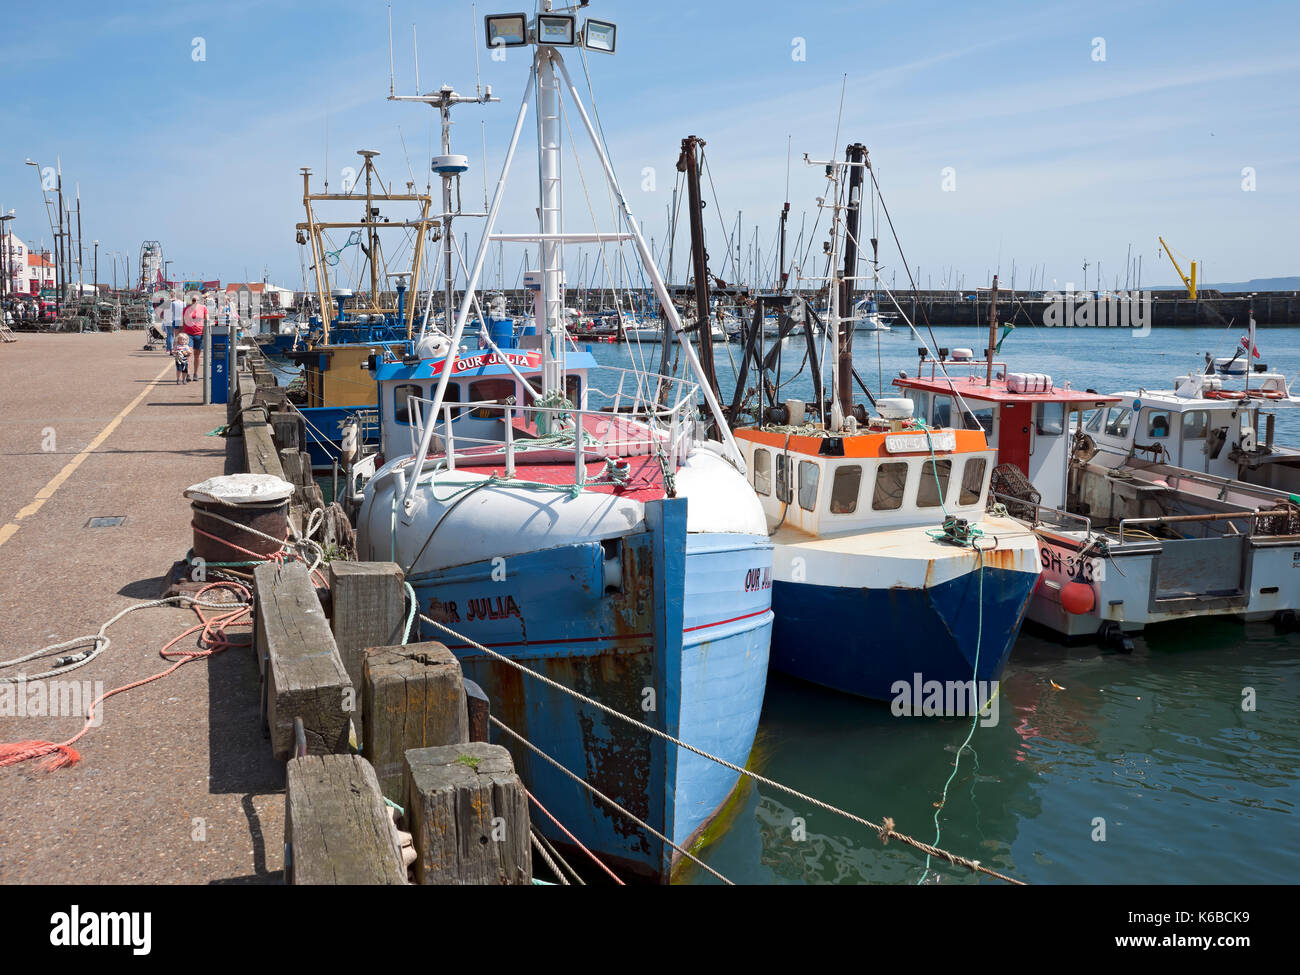 Fishing boats trawler boat moored in the harbour in summer Scarborough North Yorkshire England UK United Kingdom GB Great Britain Stock Photo